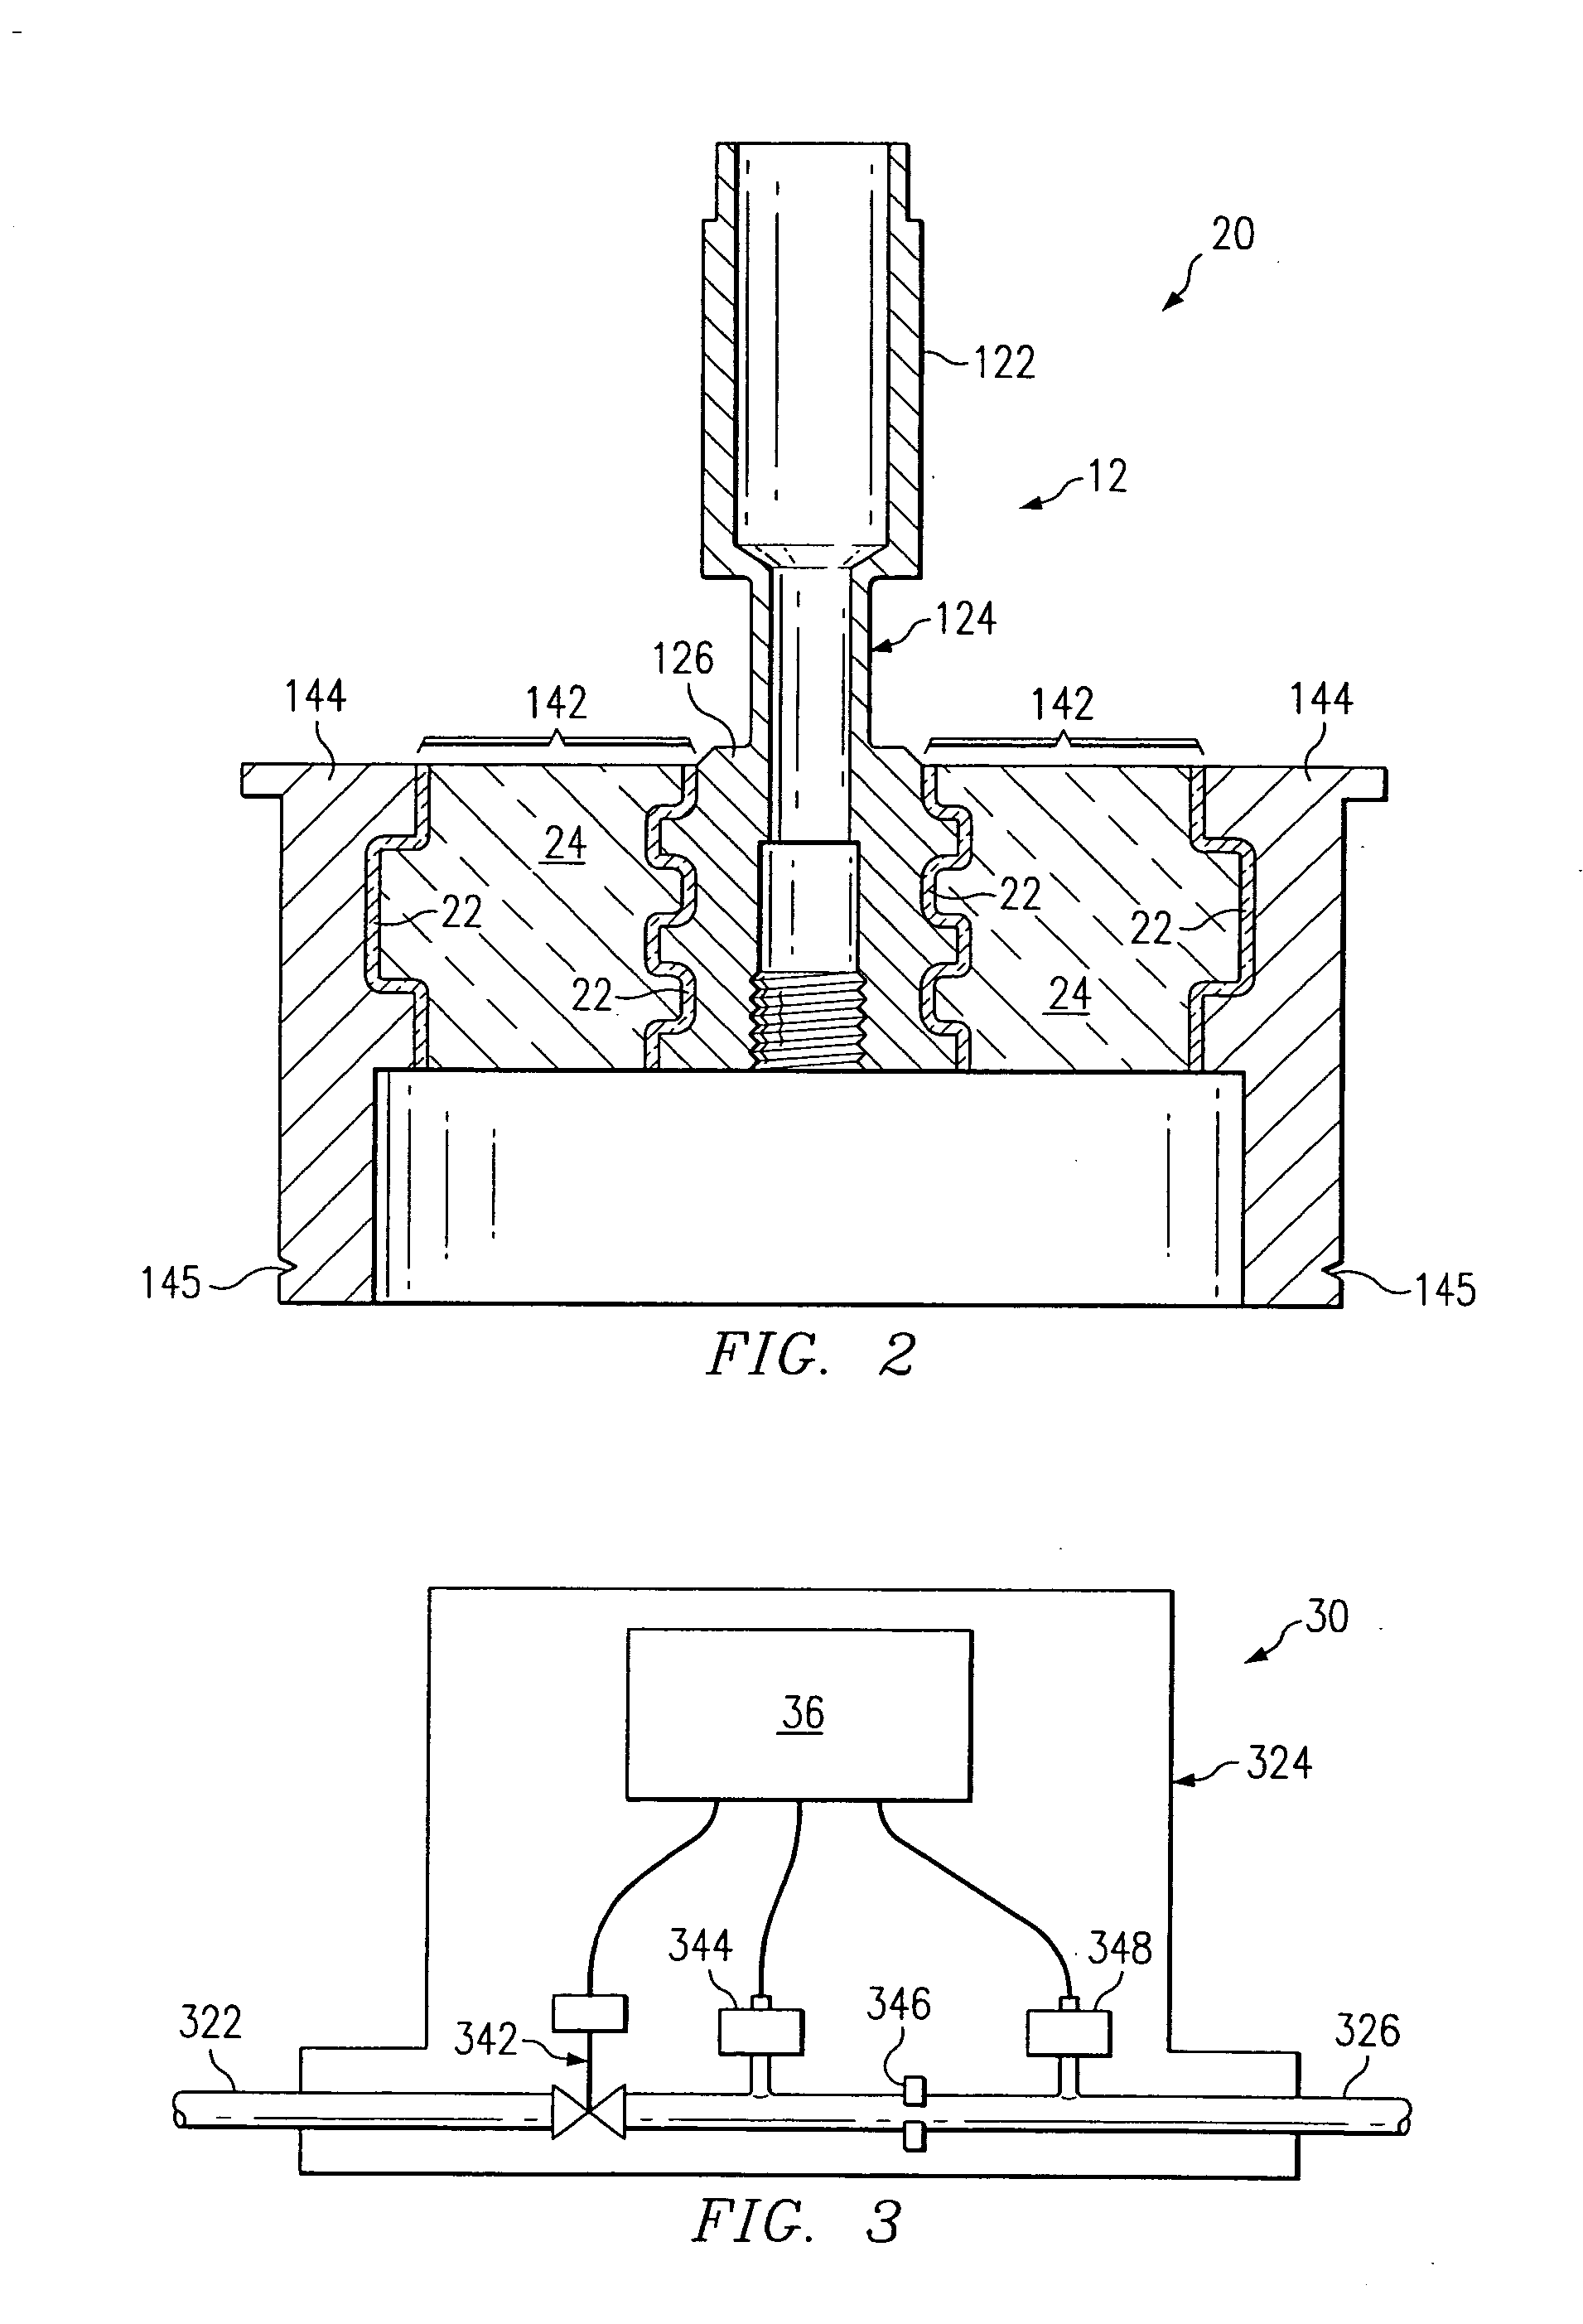 Variable capacitance measuring device